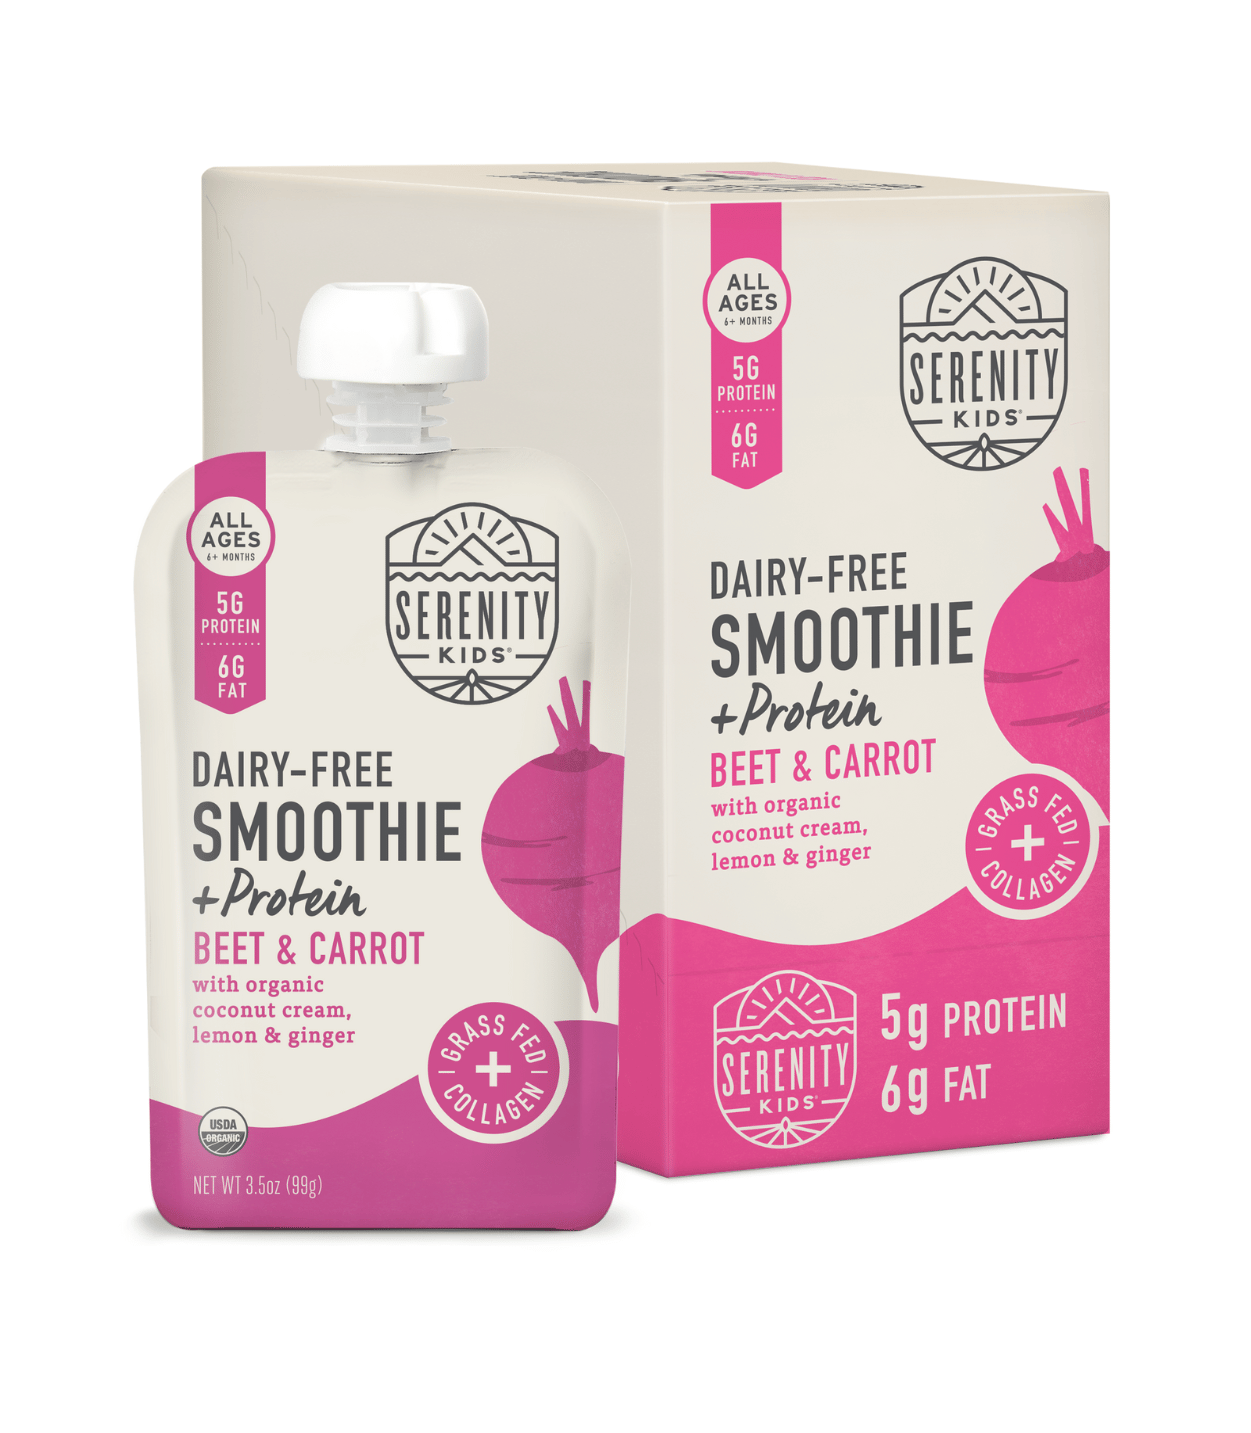 Beet & Carrot Dairy-Free Smoothie + Protein - Serenity Kids - Smoothie with Box